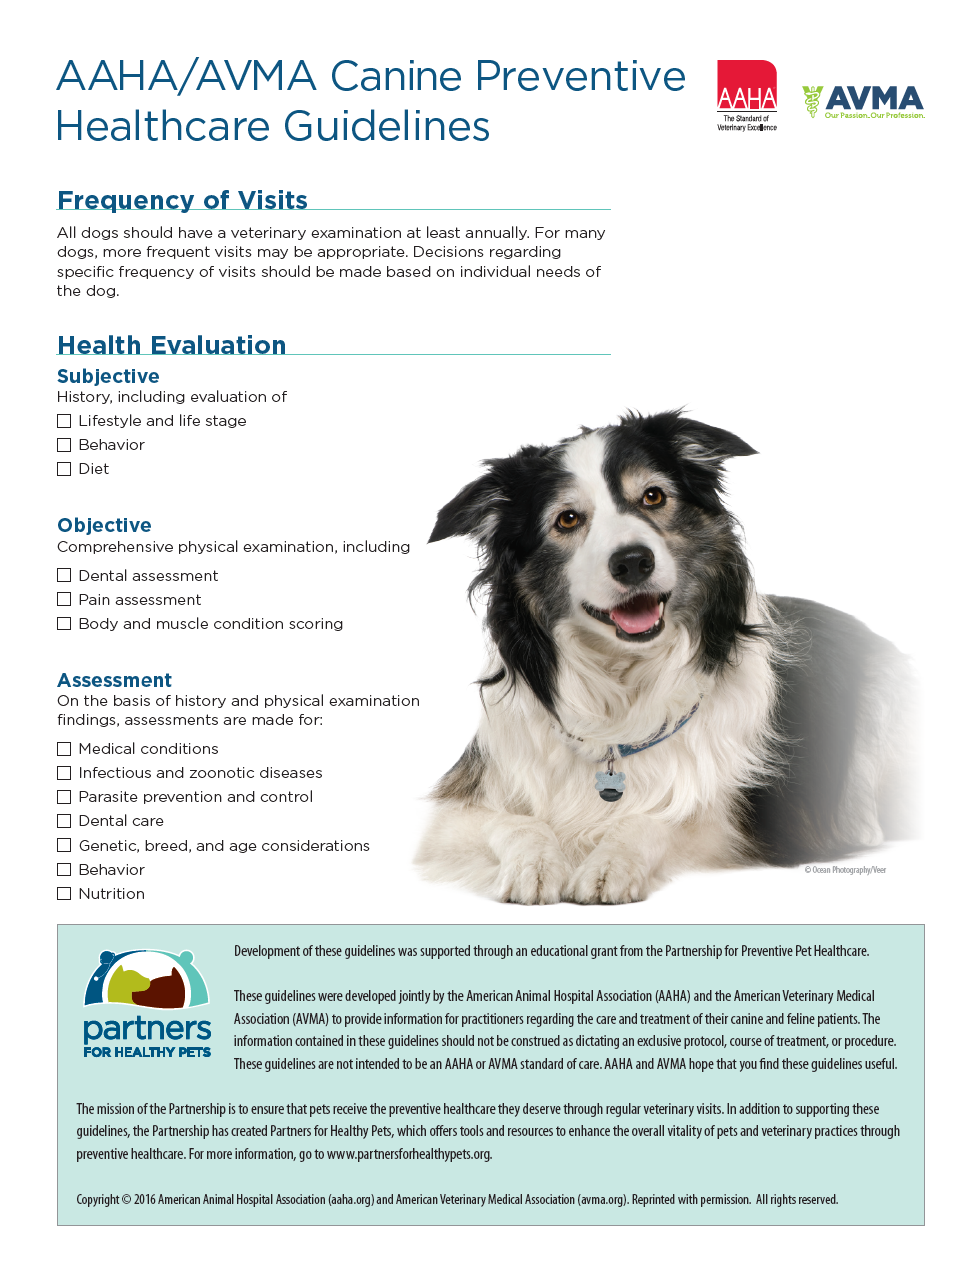 Link to Canine Preventive Care Guidelines